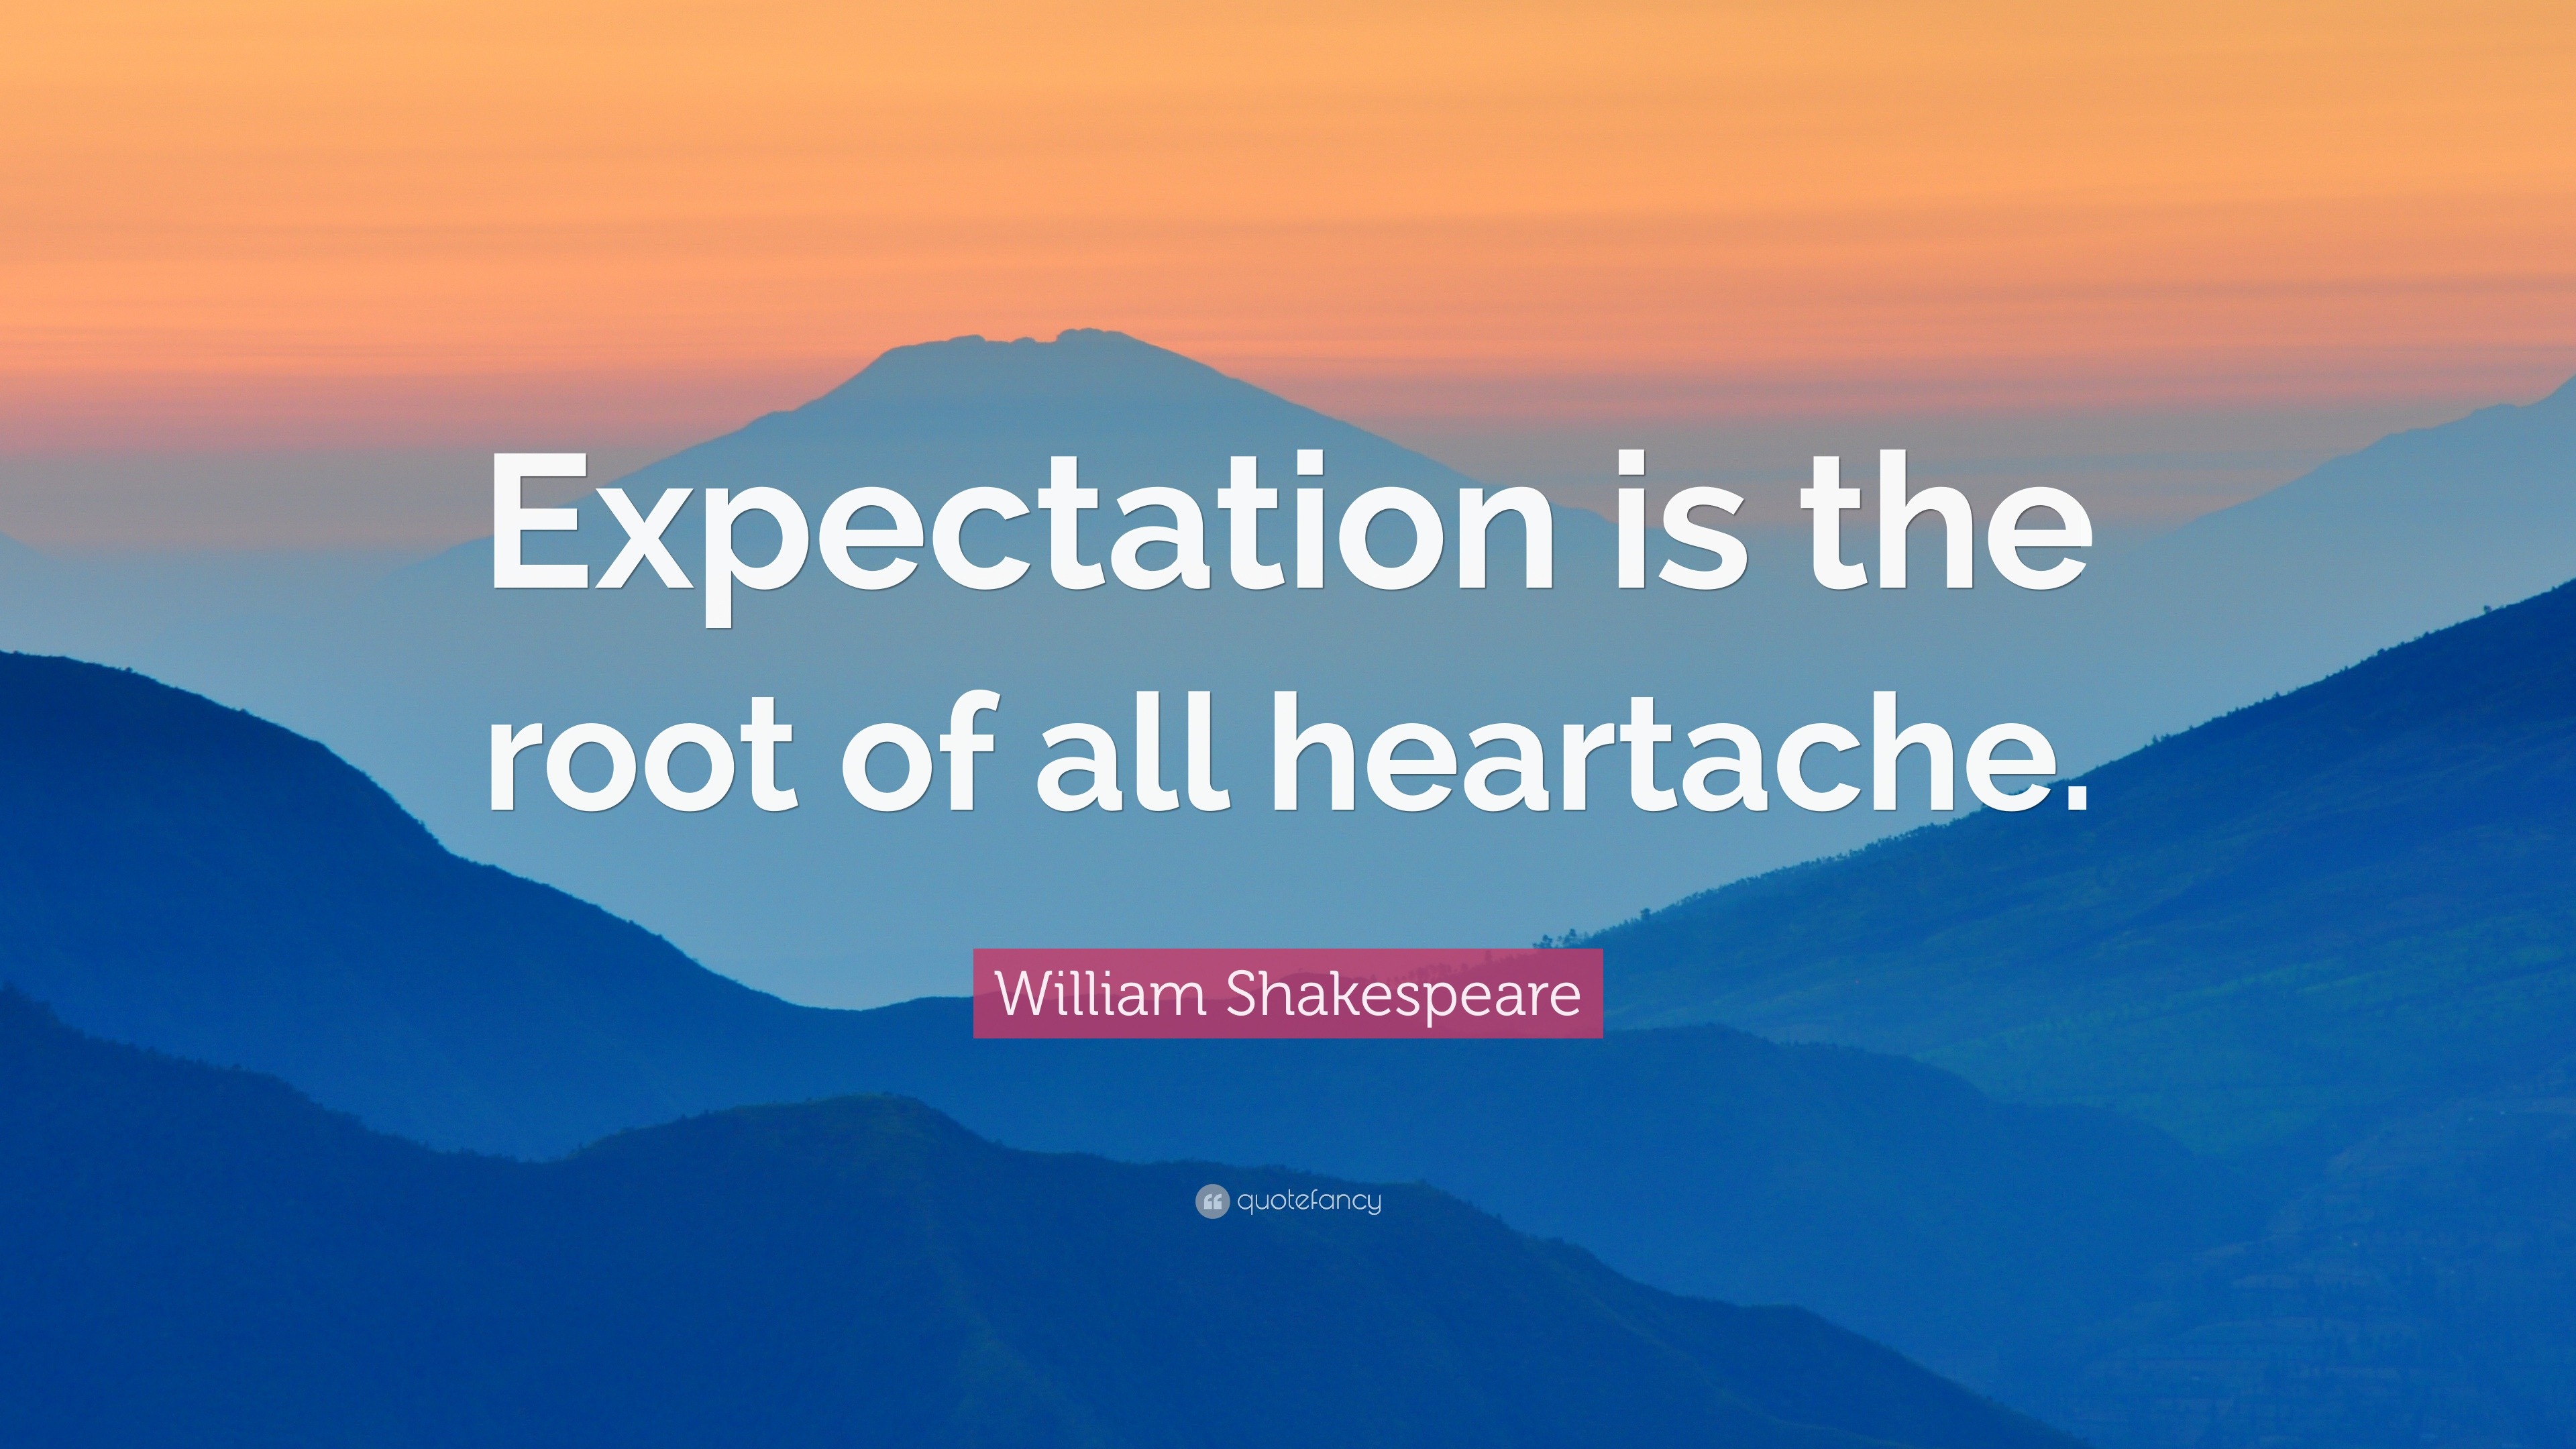 William Shakespeare Quote: “Expectation is the root of all heartache